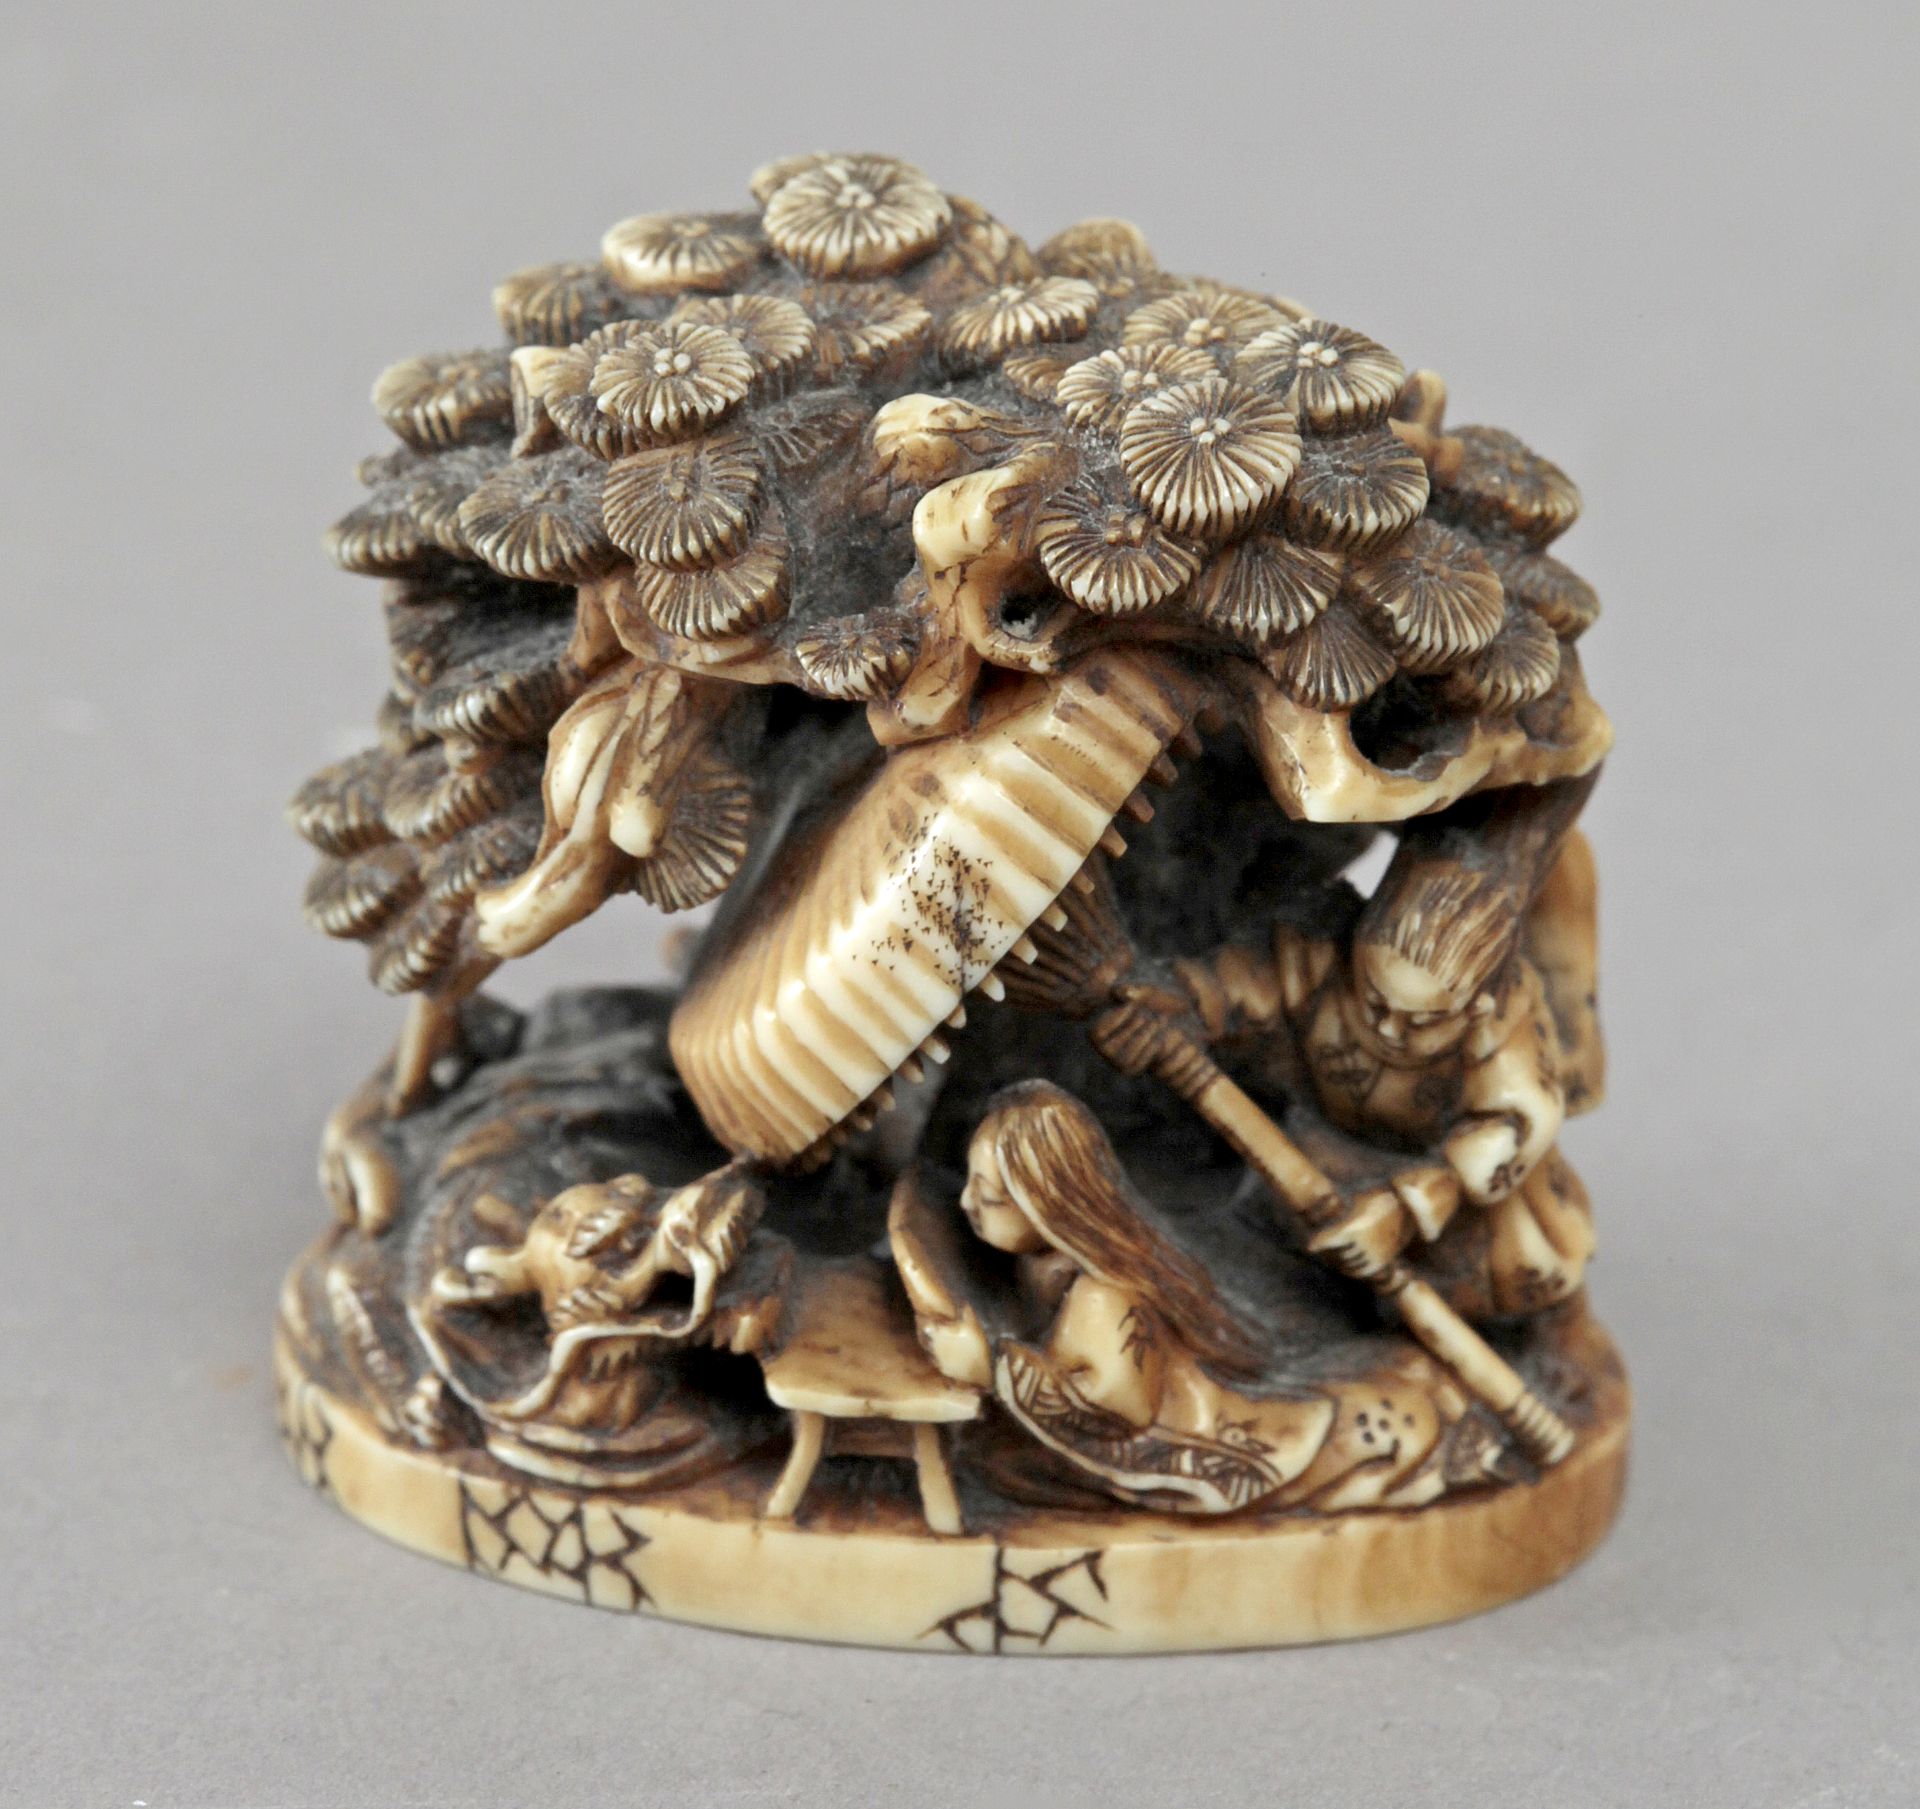 Late 19th century Japanese school. A carved ivory netsuke okimono depicting a group of figurines